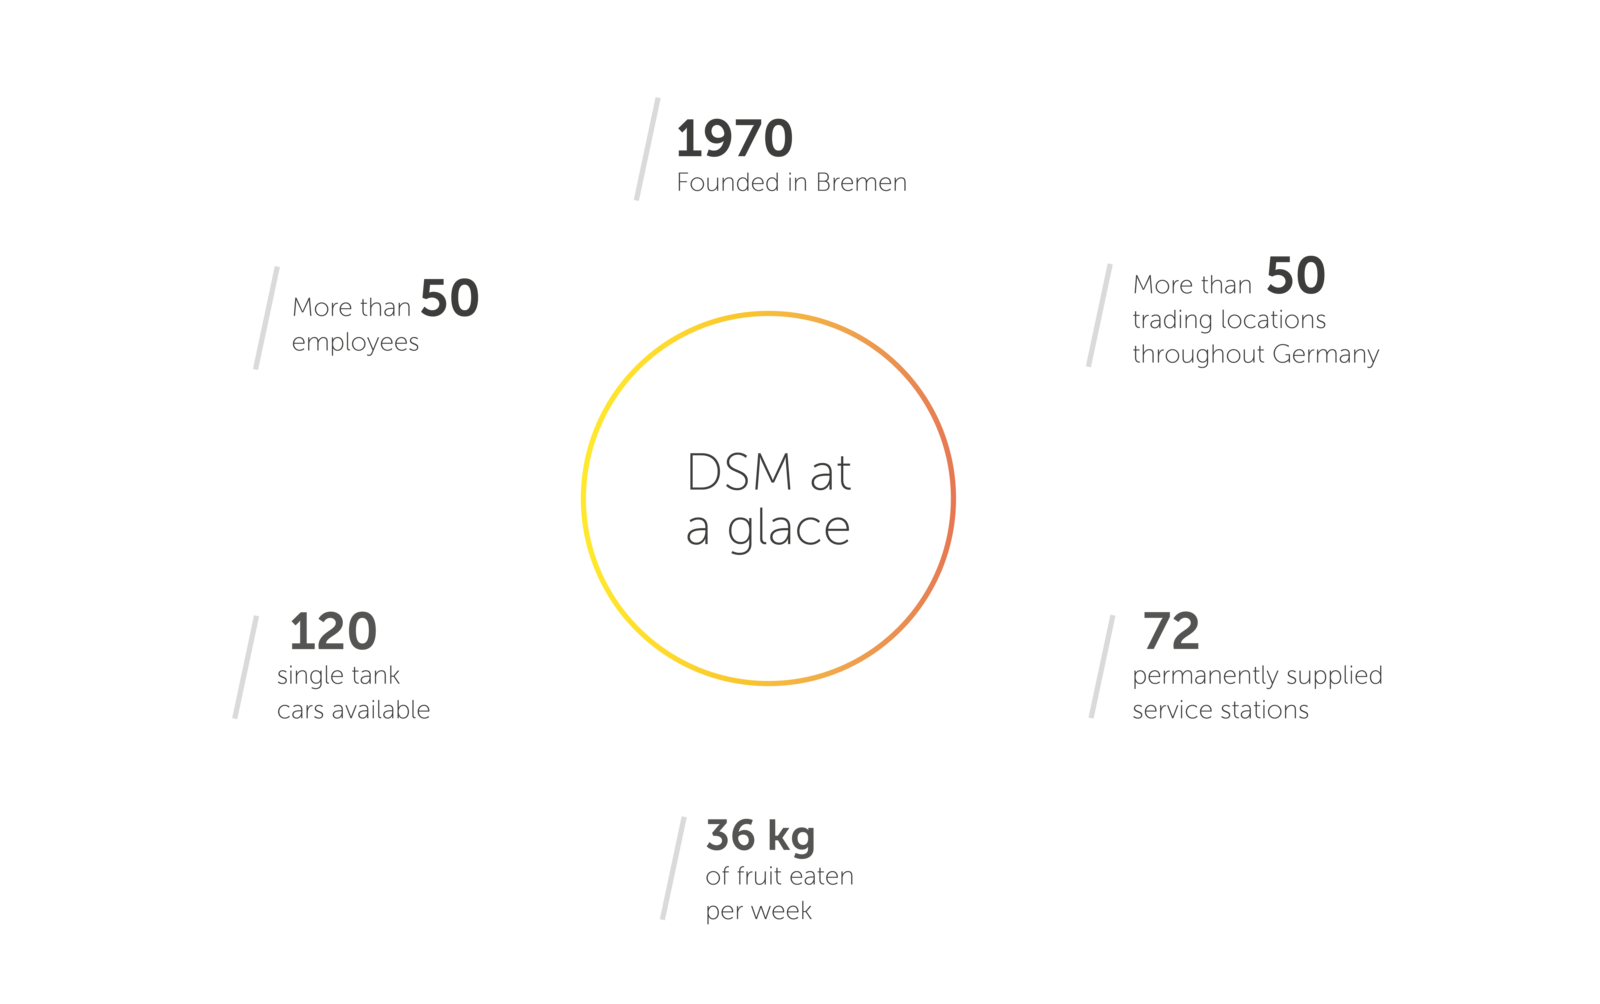 Facts and figures about DS-Mineralöl